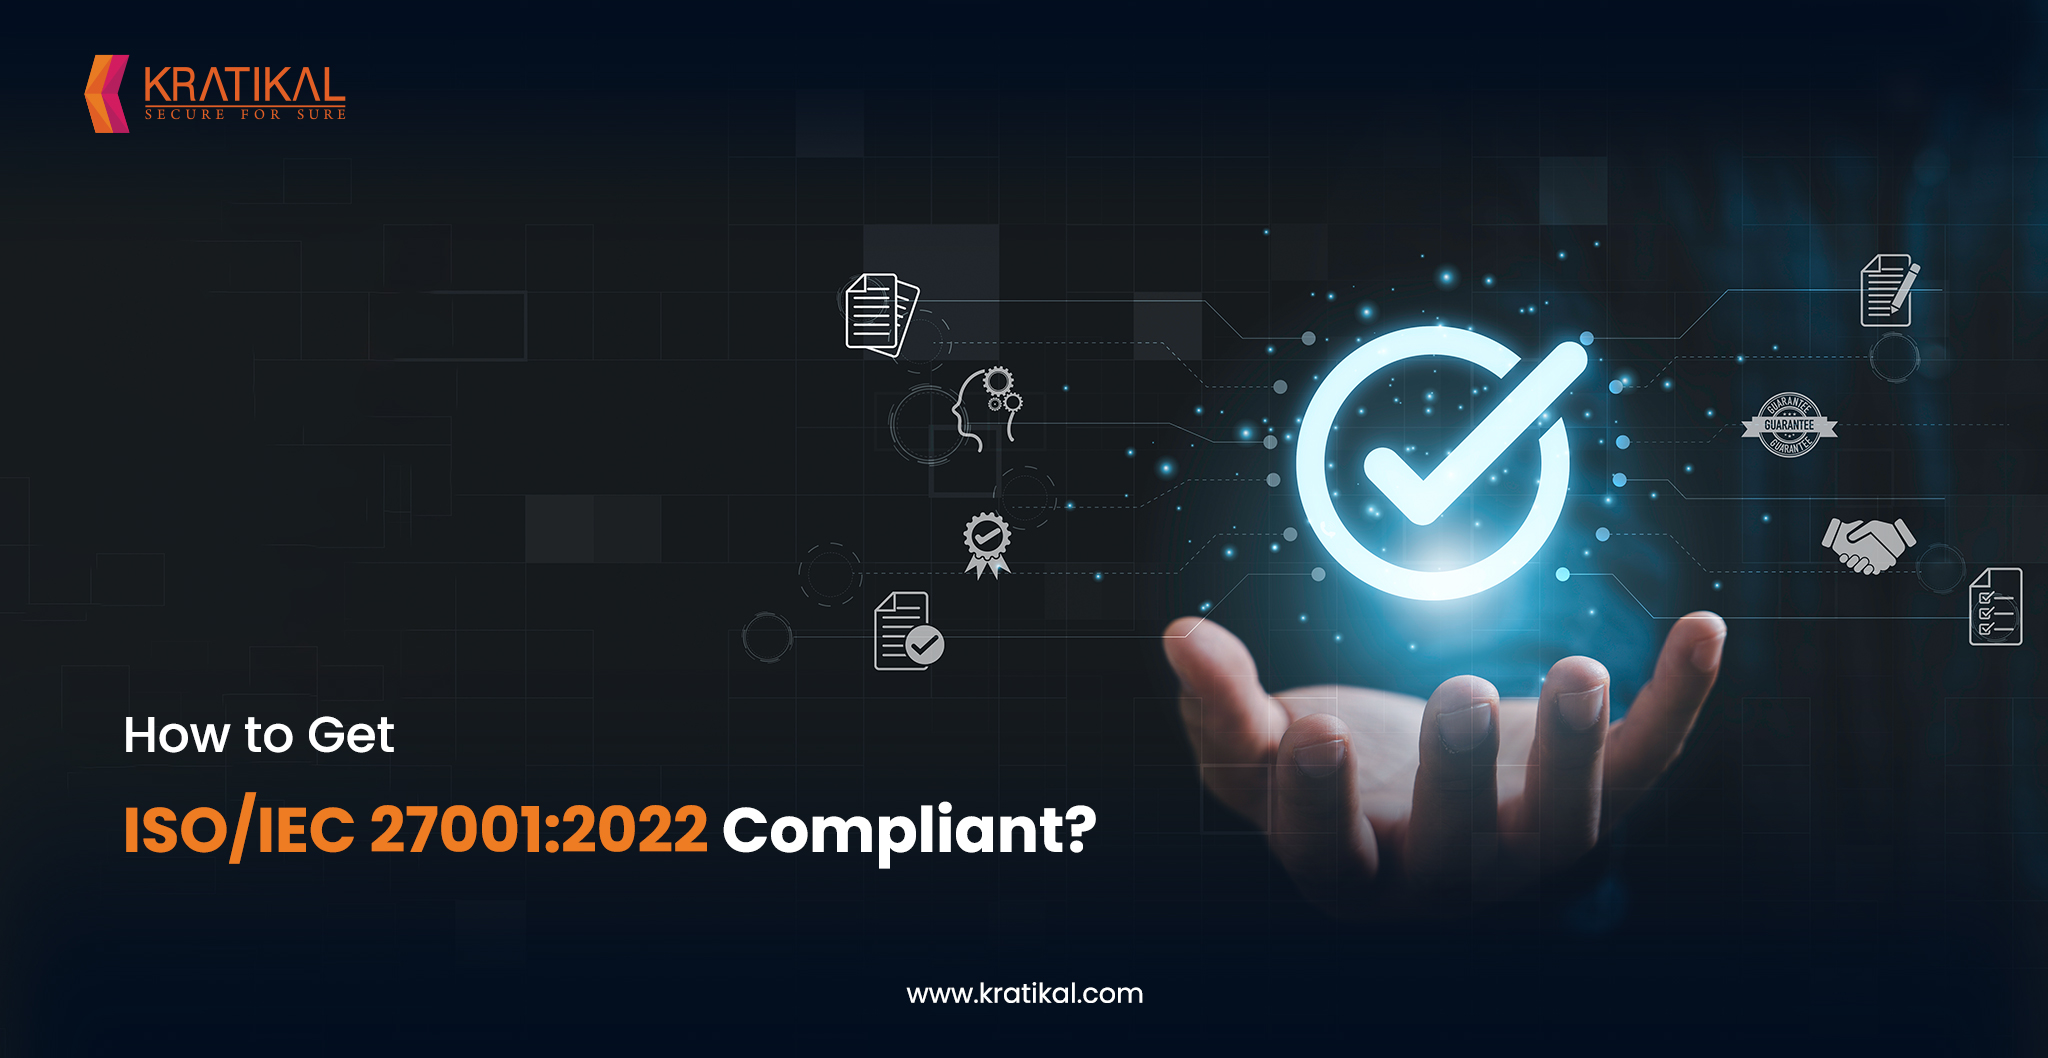 How to Get ISO 27001:2022 Compliant?